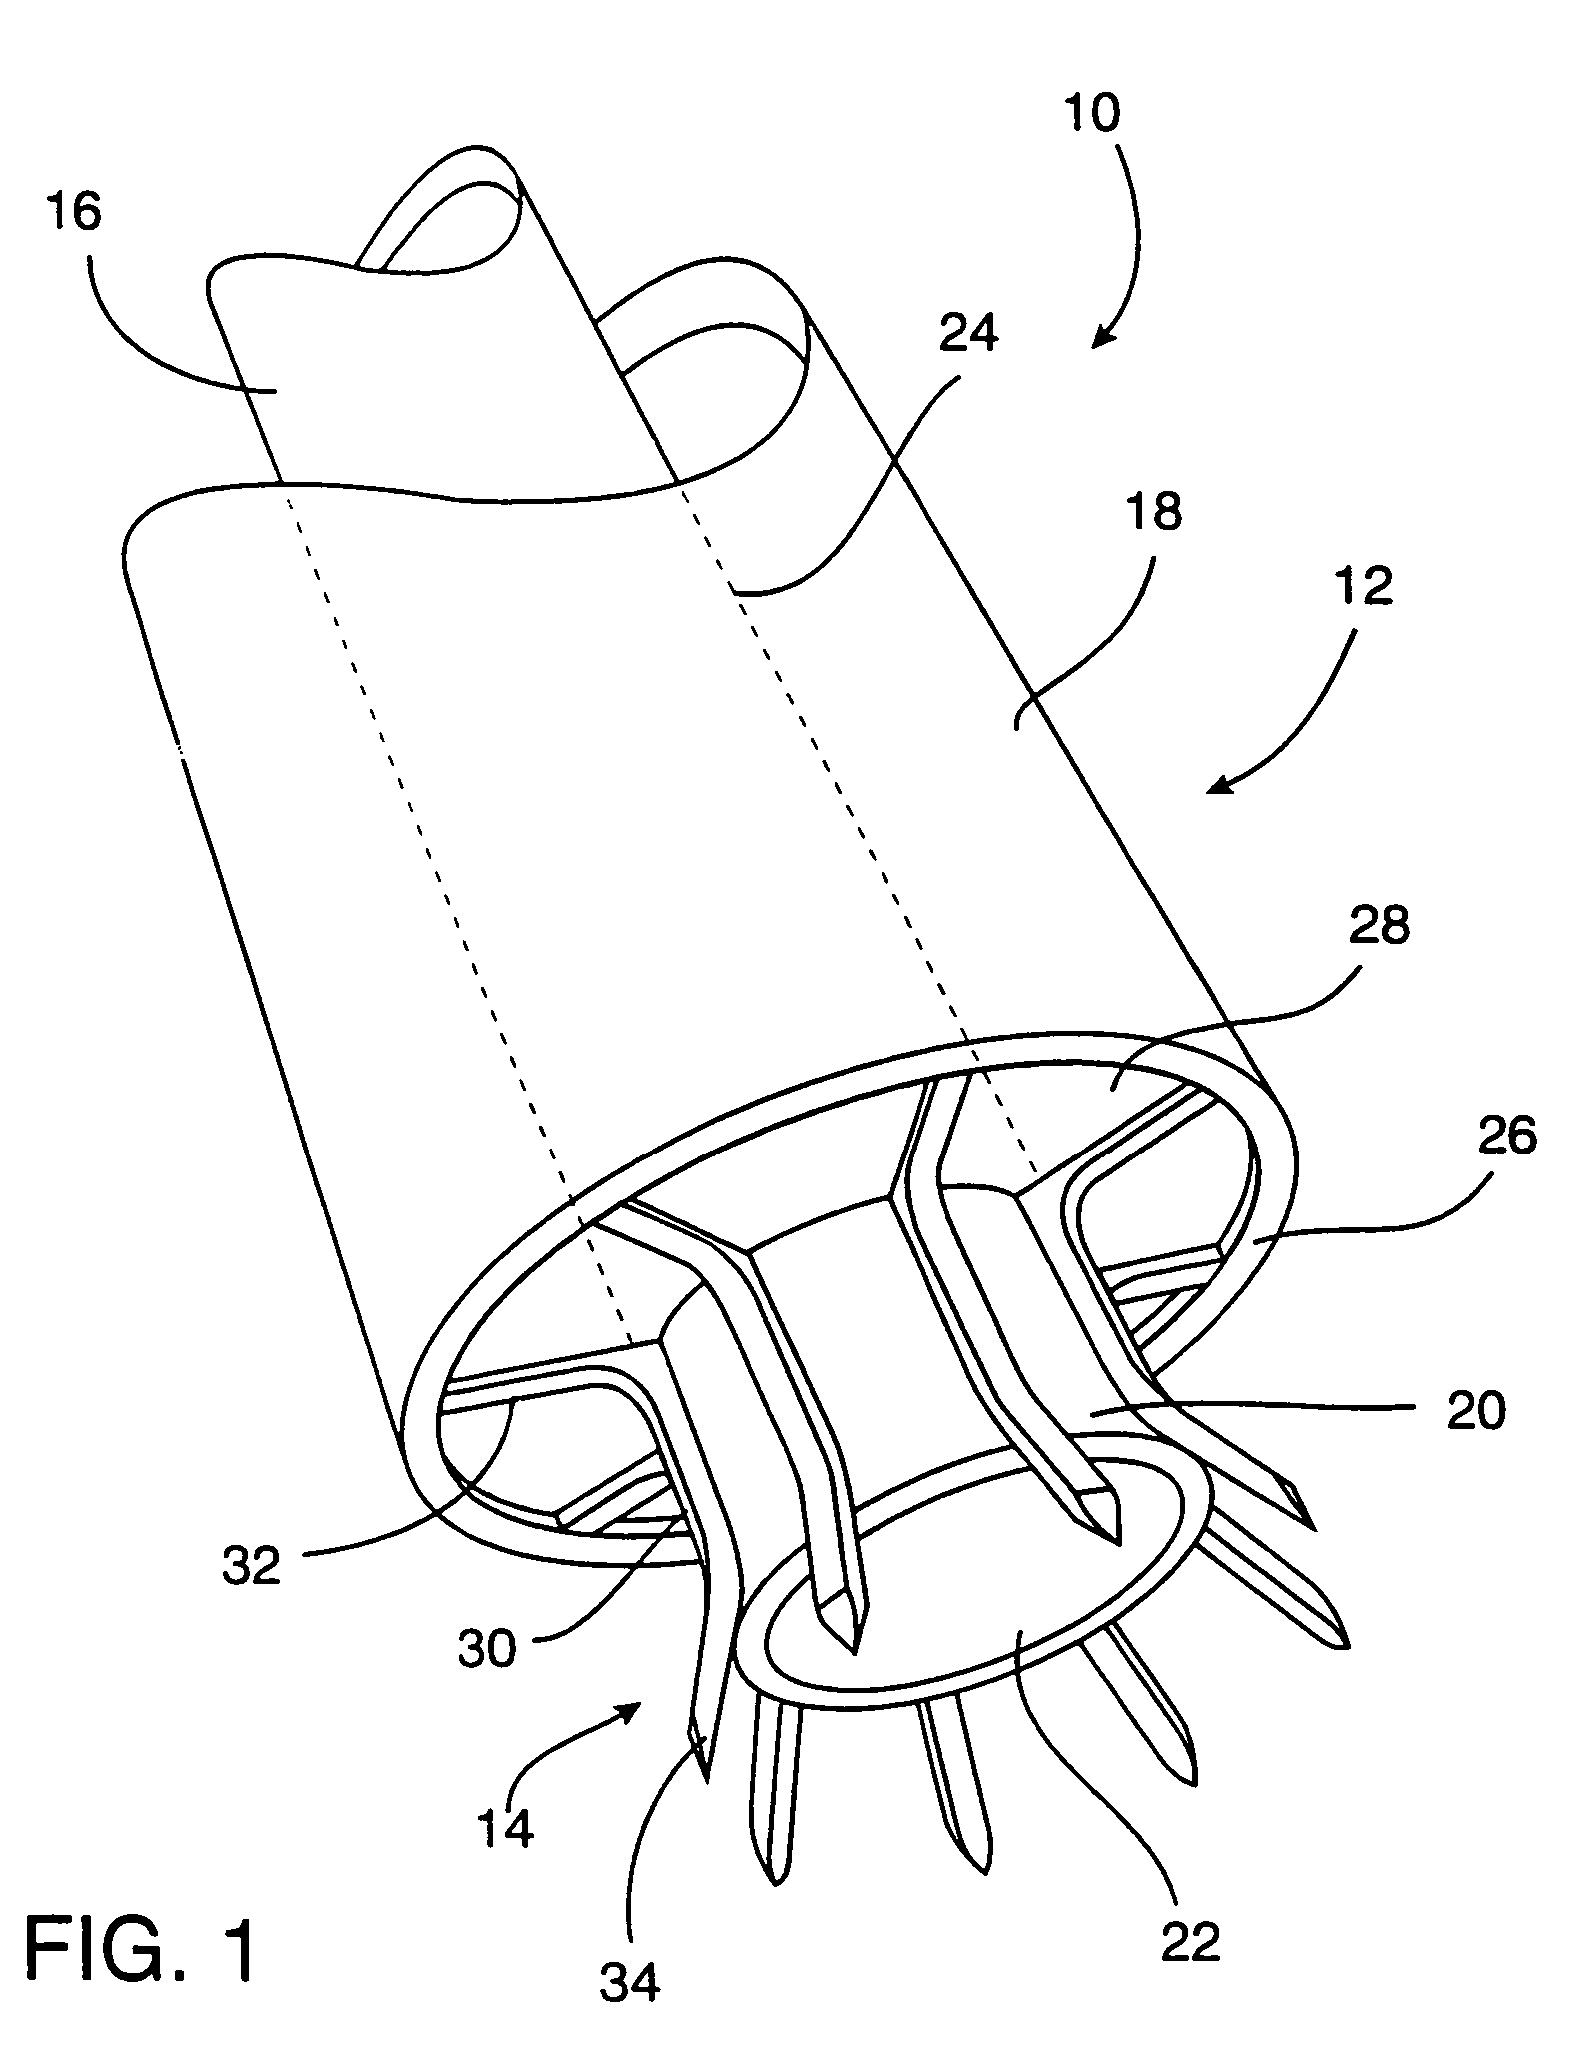 System for performing vascular anastomoses